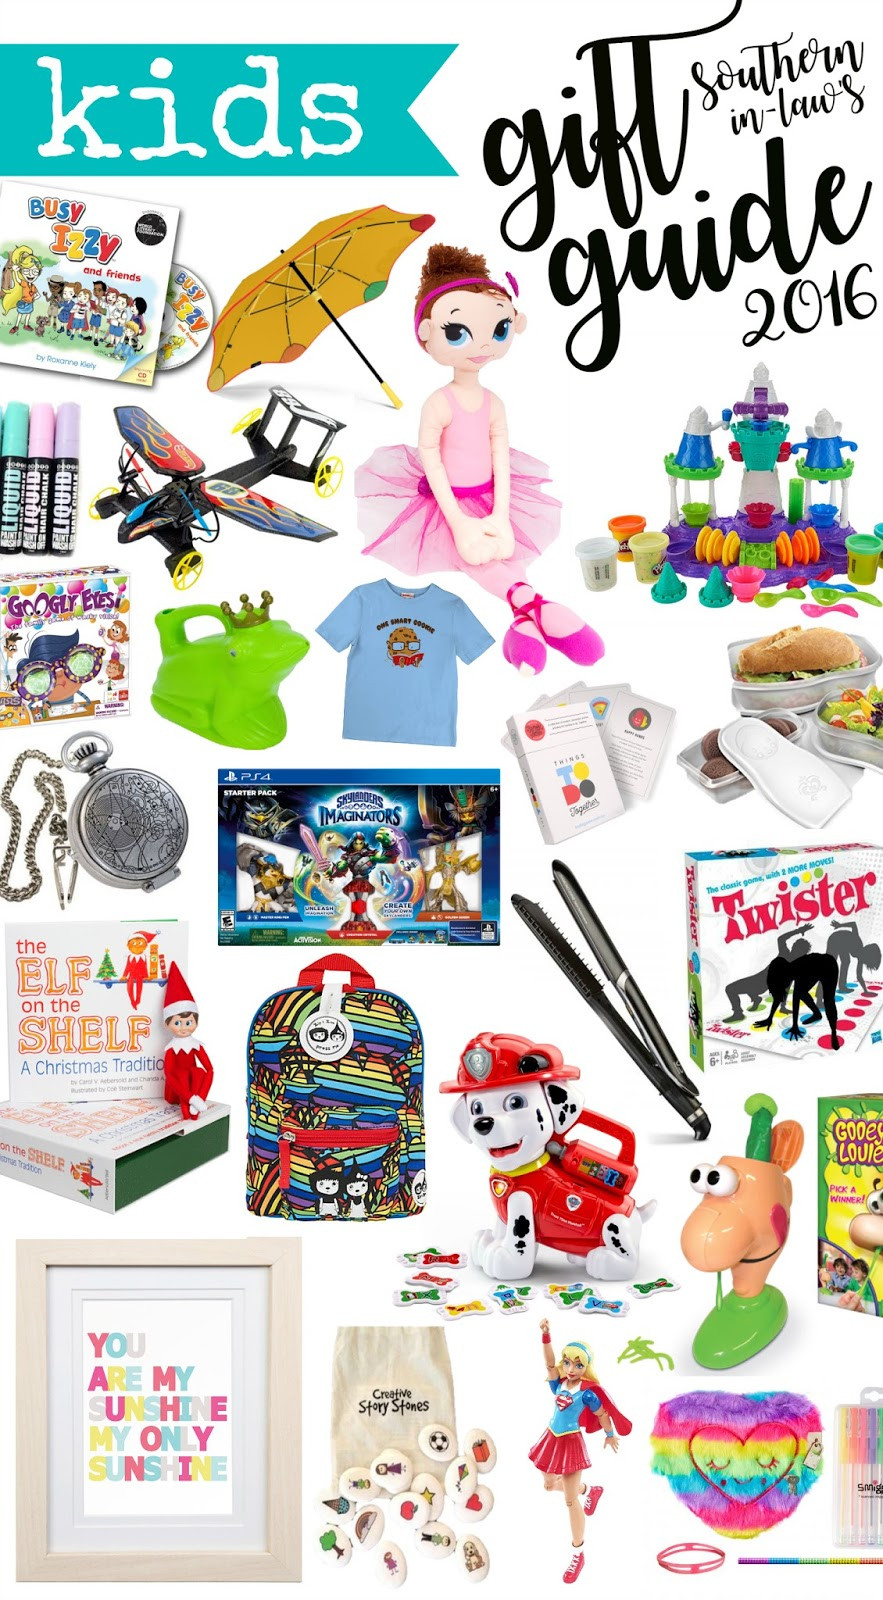 Holiday Gift Ideas For Kids
 Southern In Law 2016 Kids Christmas Gift Guide